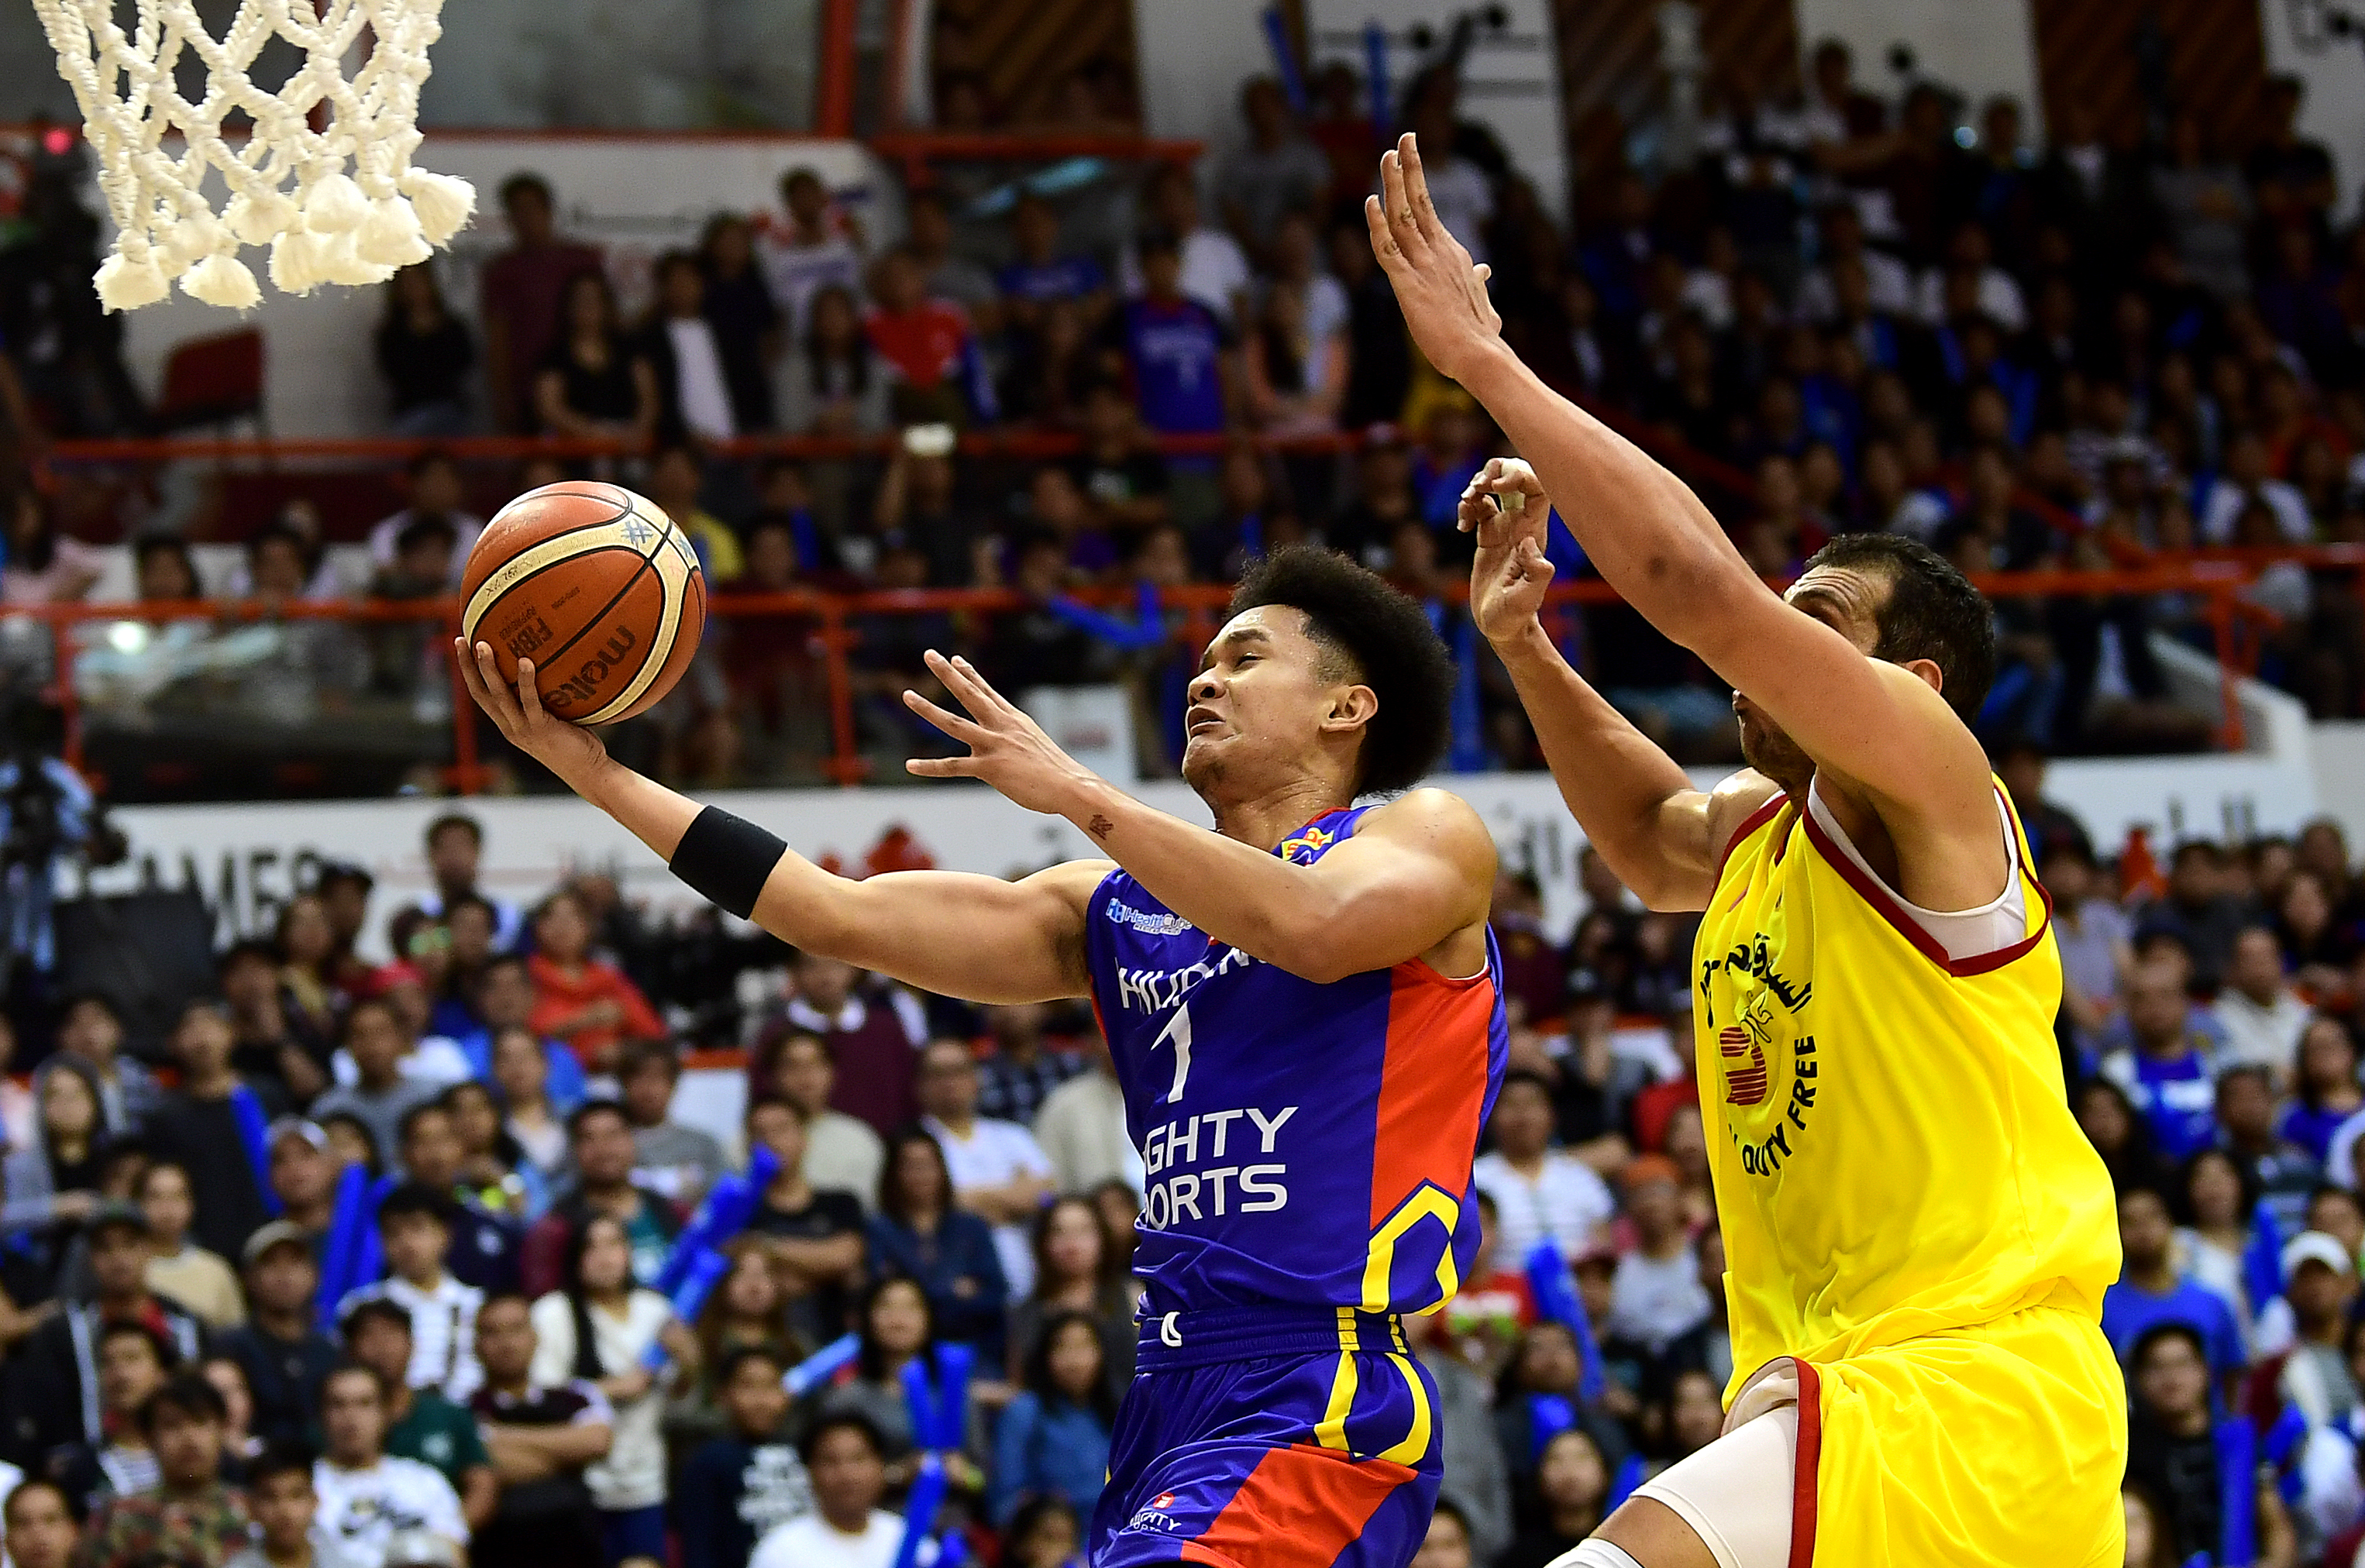 Mighty-PH relegated to battle for 3rd by hot-shooting Lebanese opponent